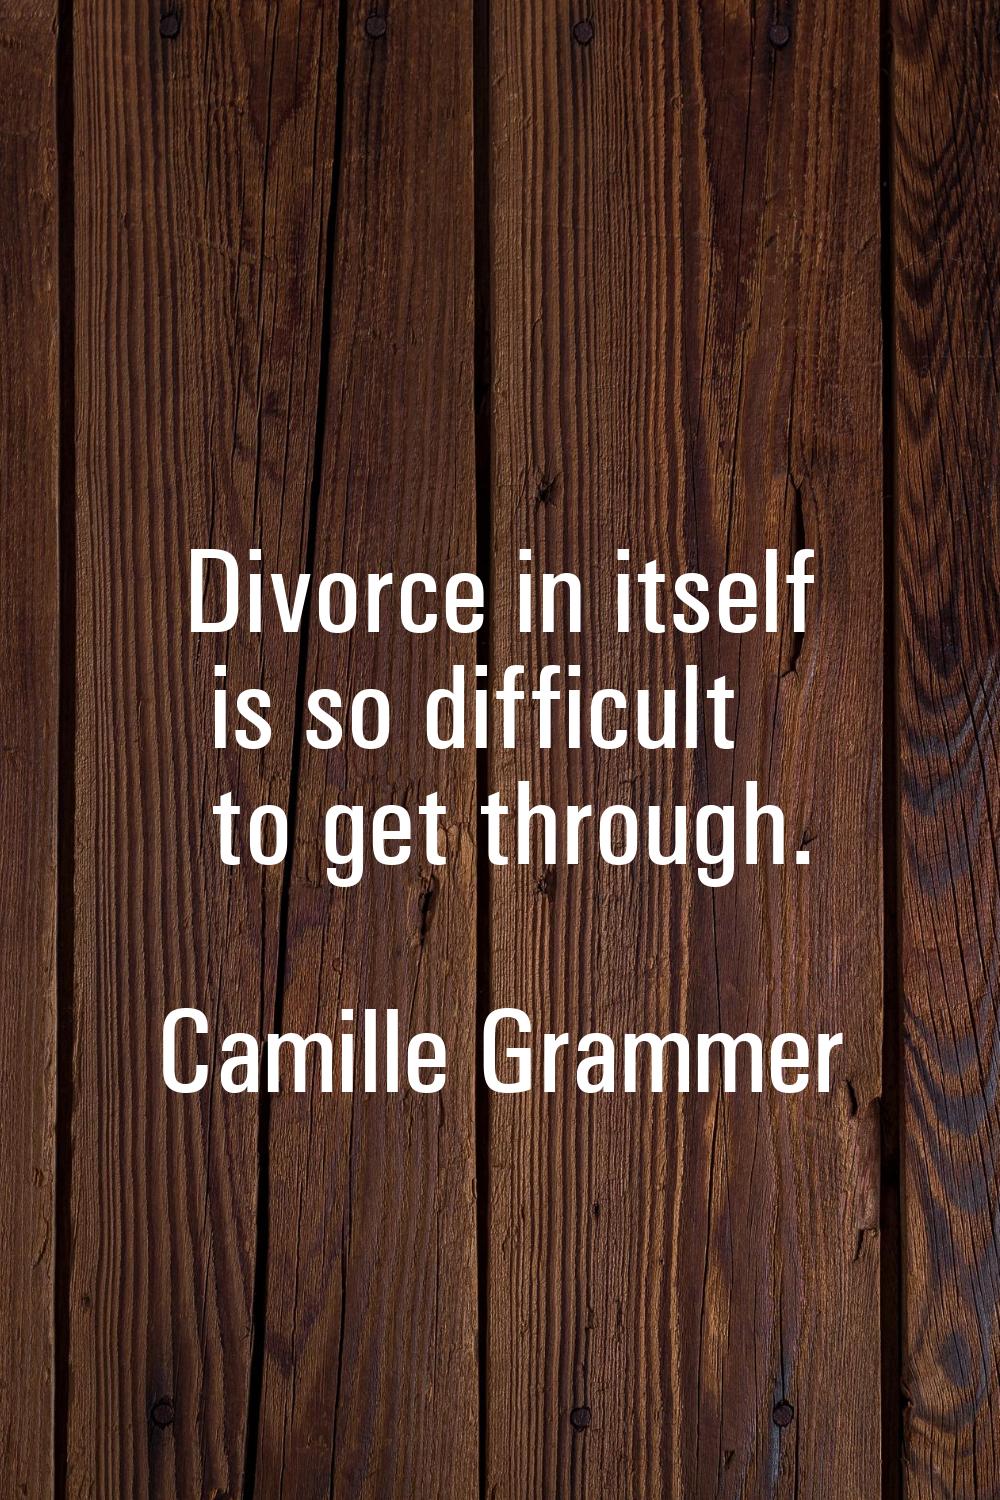 Divorce in itself is so difficult to get through.